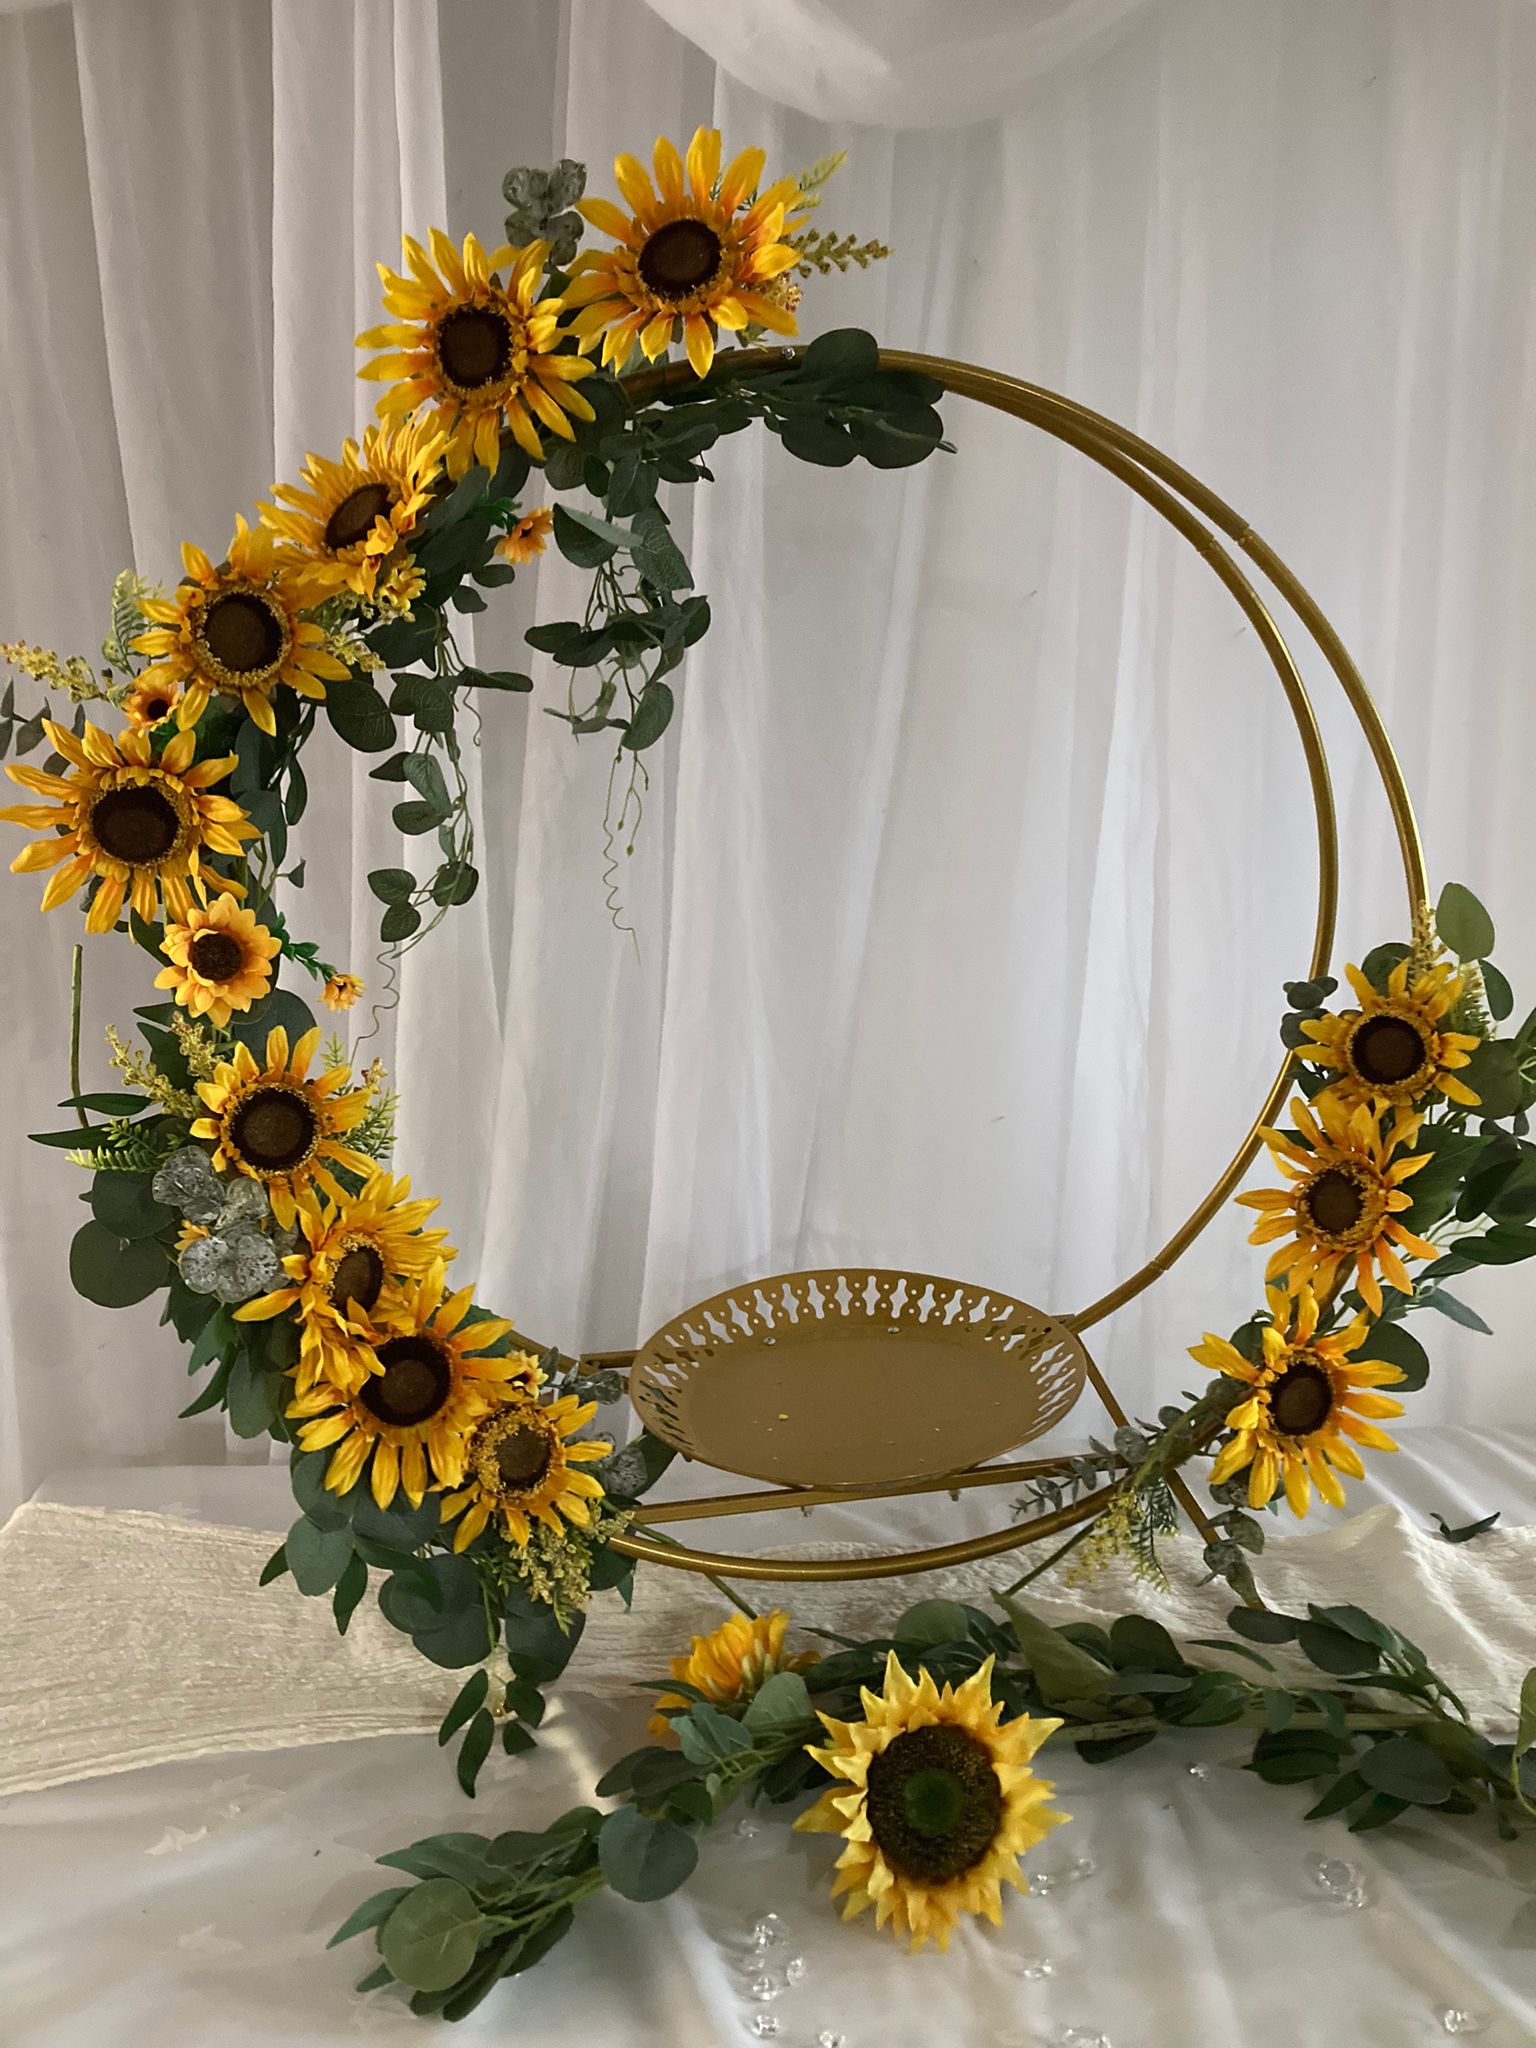 Gold hoop cake stand with sunflowers around the edge